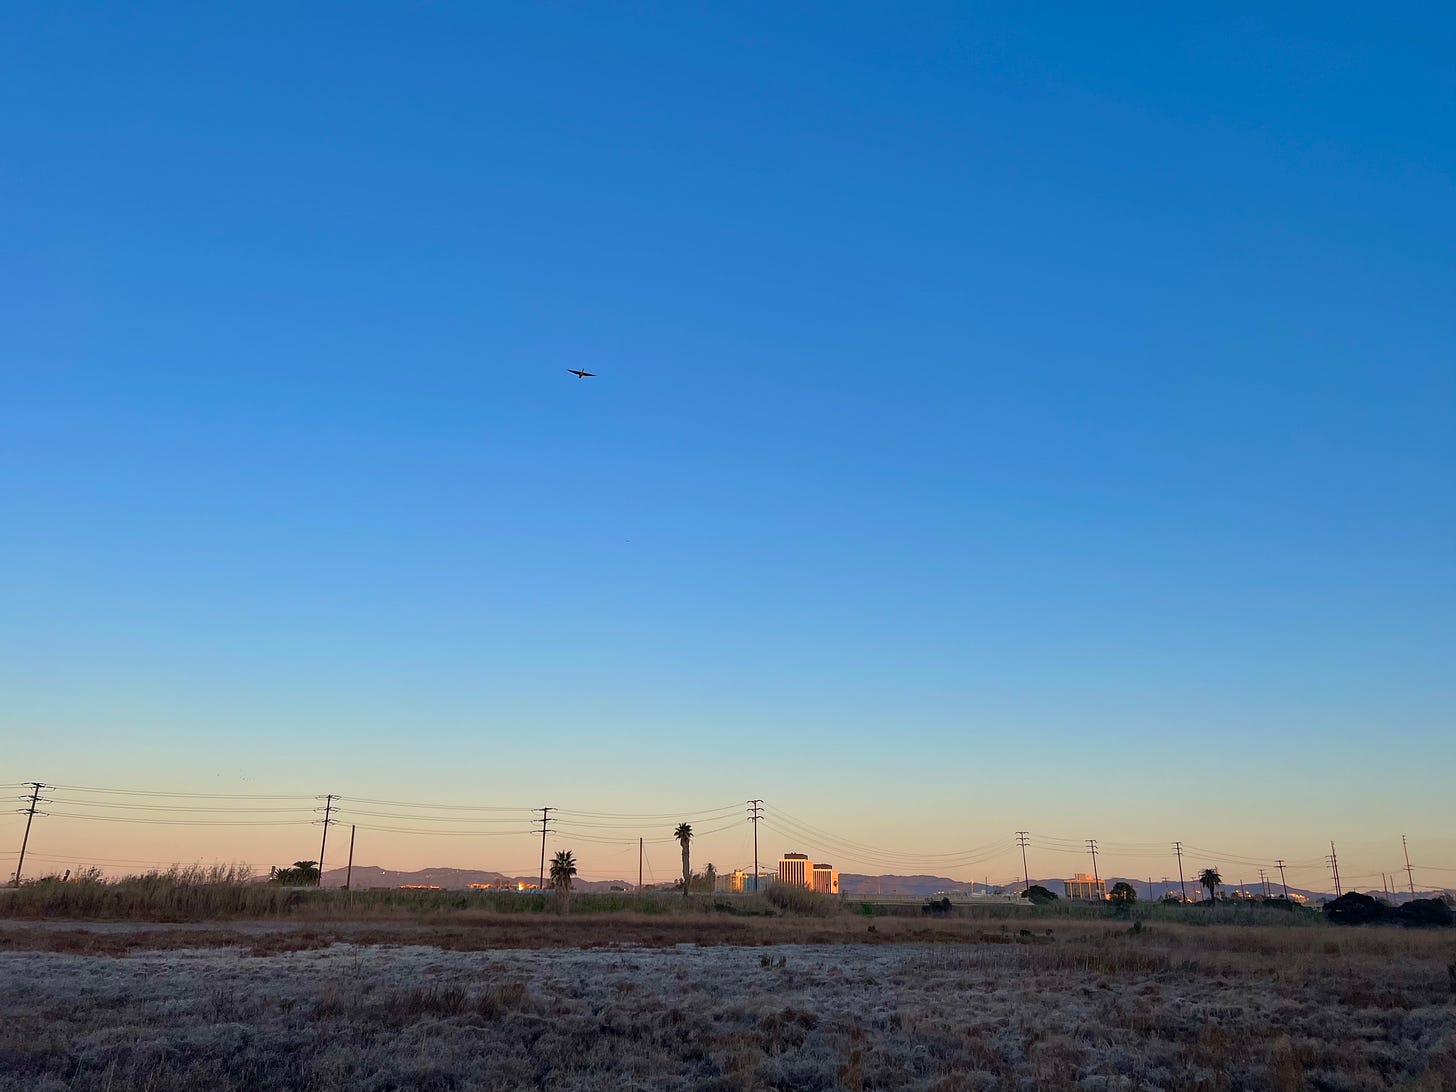 Picture of Angeleno edgeland plain, small office buildings and telephone poles in the near distance, mountains behind, frosty wetland in the foreground, goose flying across a dark blue morning sky